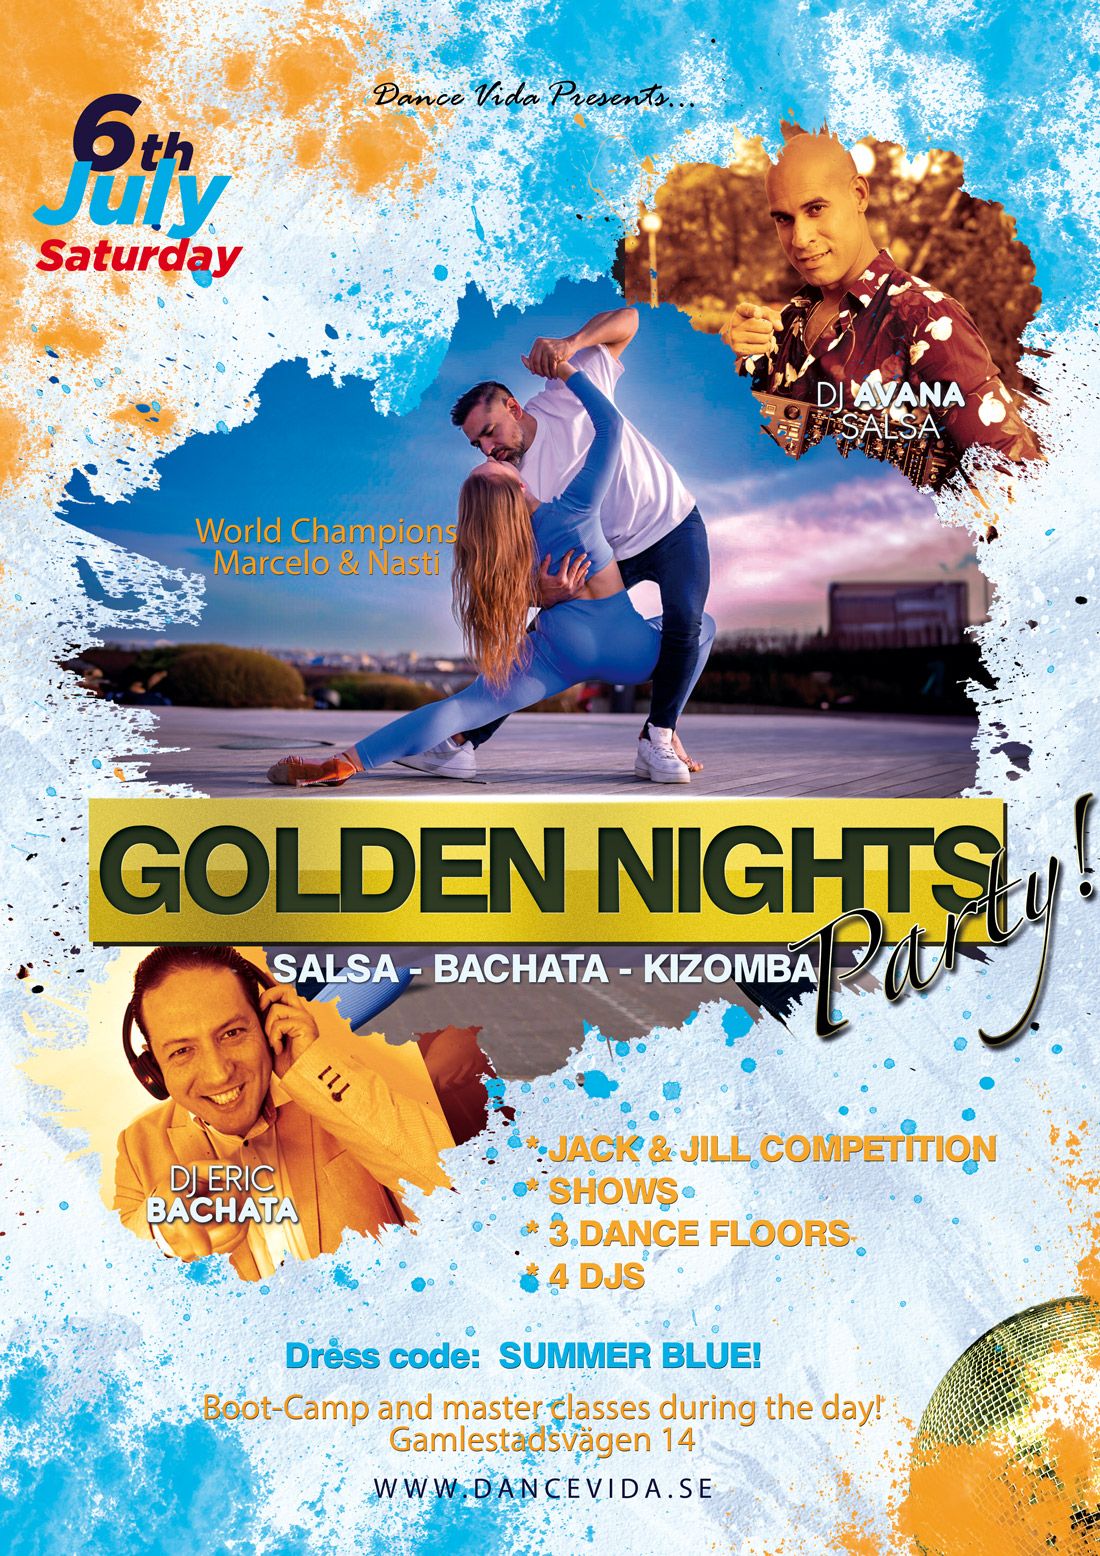 GOLDEN NIGHTS PARTY! Jack & Jill, Shows and Party!